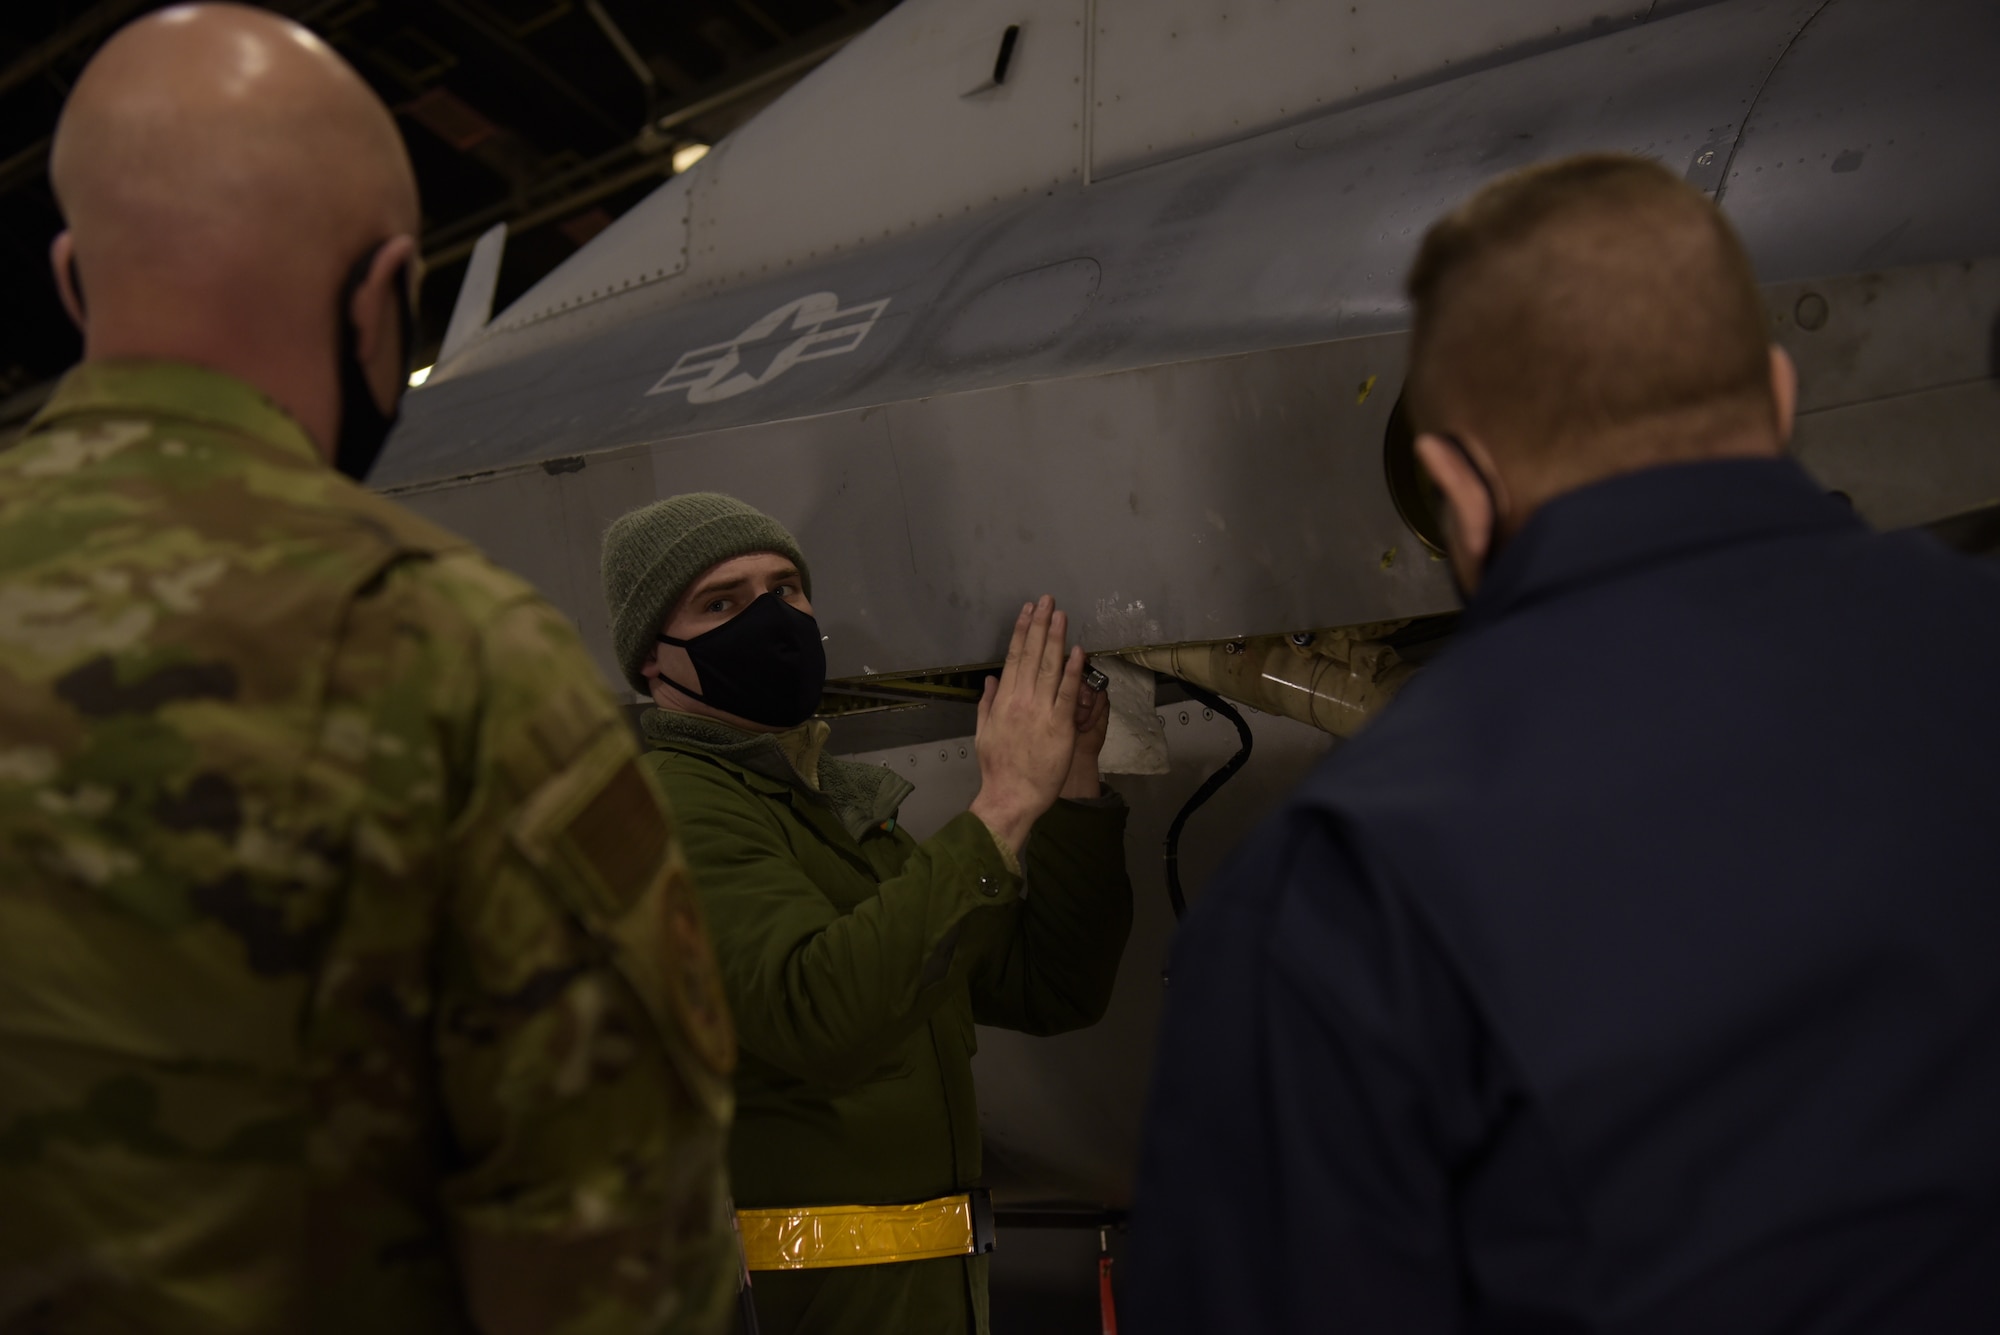 U.S. Air Force Tech. Sgt. Mark Ward, a 35th Aircraft Maintenance Squadron dedicated crew chief, explains the process of repairing a F-16 Fighting Falcon to Col. Jesse J. Friedel, right, the 35th Fighter Wing commander, and Chief Master Sergeant Joey R. Meininger, left, the 35th FW command chief, during a Wild Weasel Walk-Through at Misawa Air Base, Japan, Dec. 29, 2020. The wing being replaced is located on the back of the aircraft and it controls whether the plane goes up or down. (U.S. Air Force photo by Airman 1st Class Joao Marcus Costa)